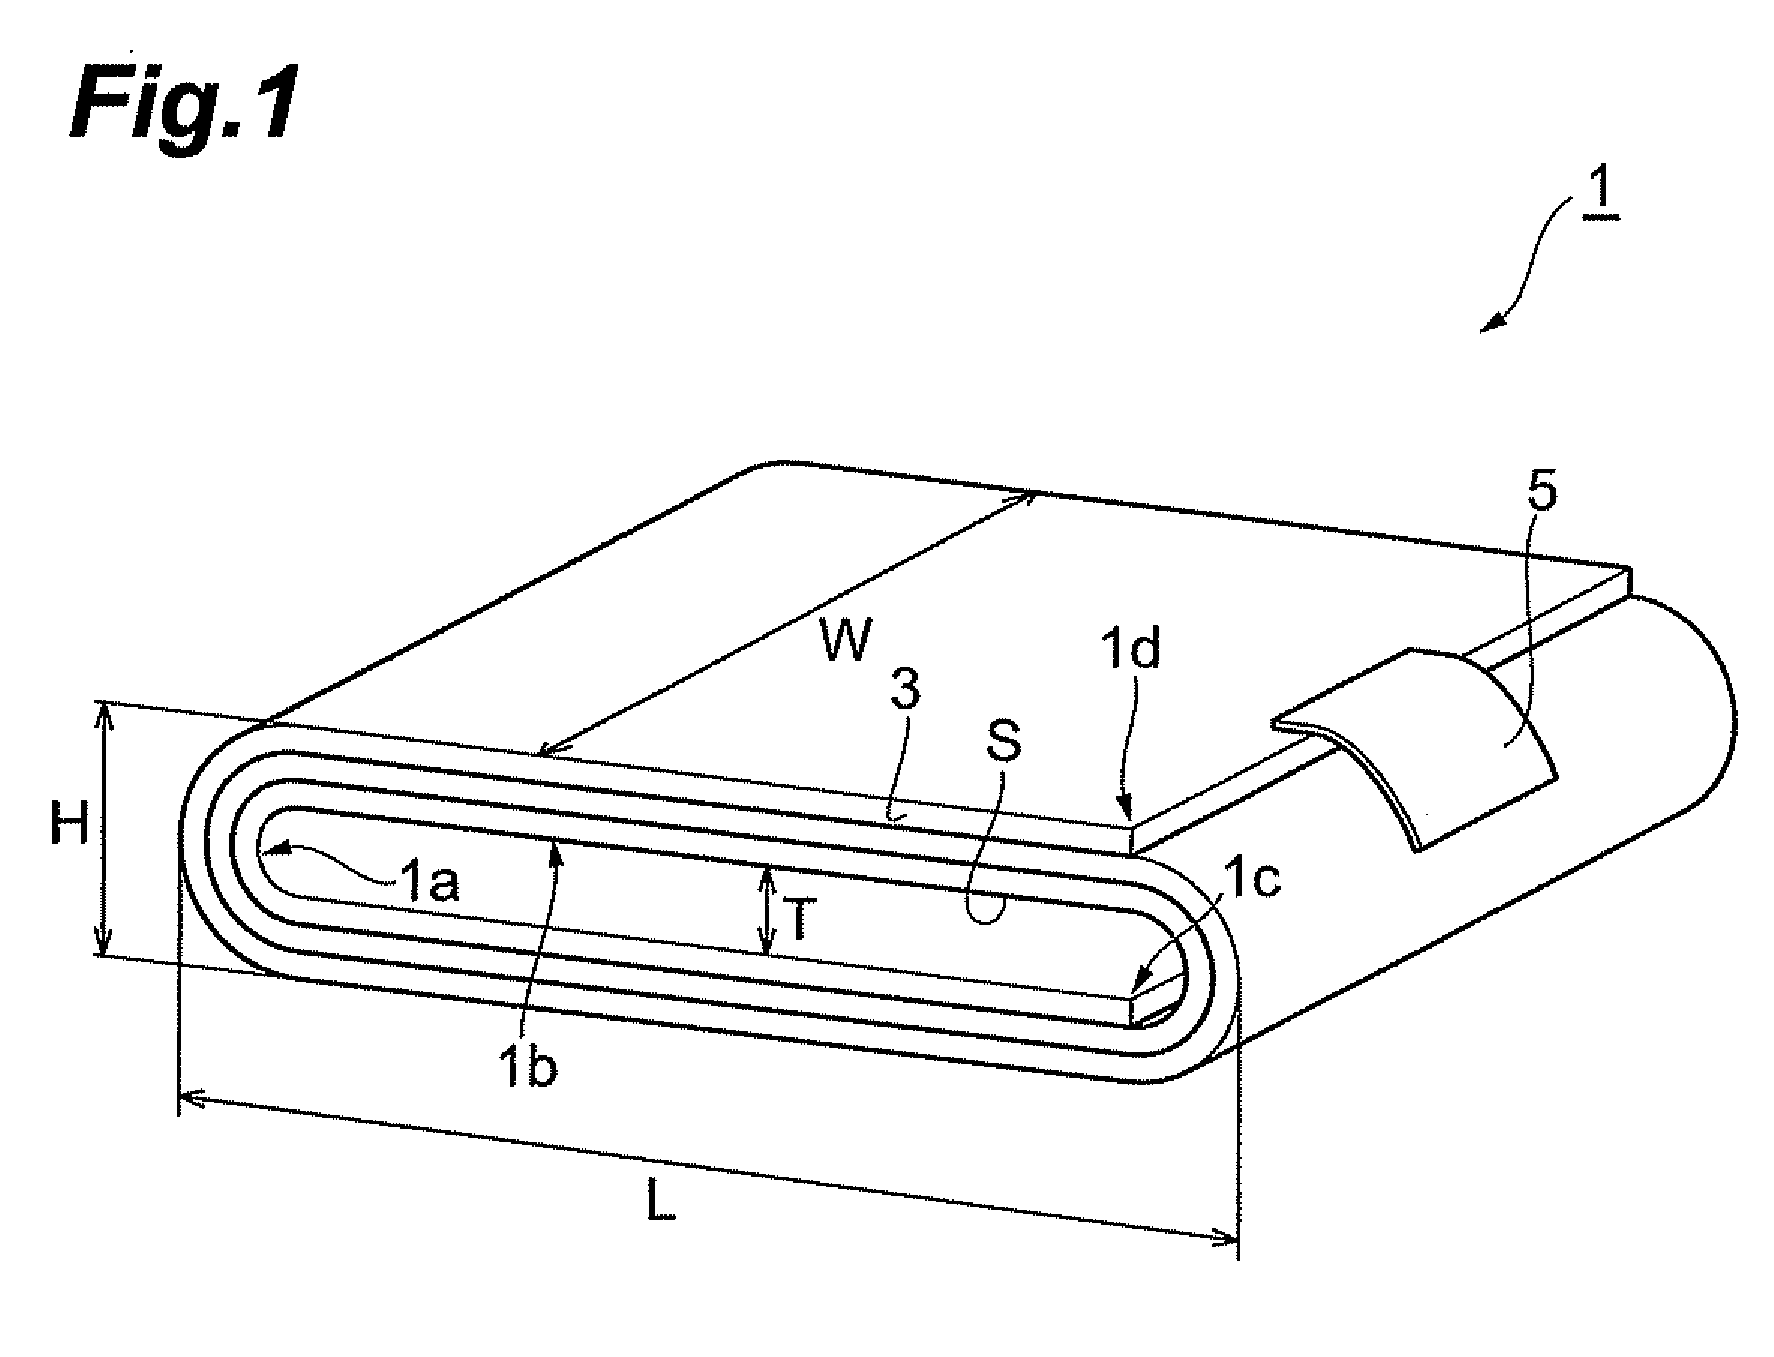 Wound electrochemical device and method of manufacturing same